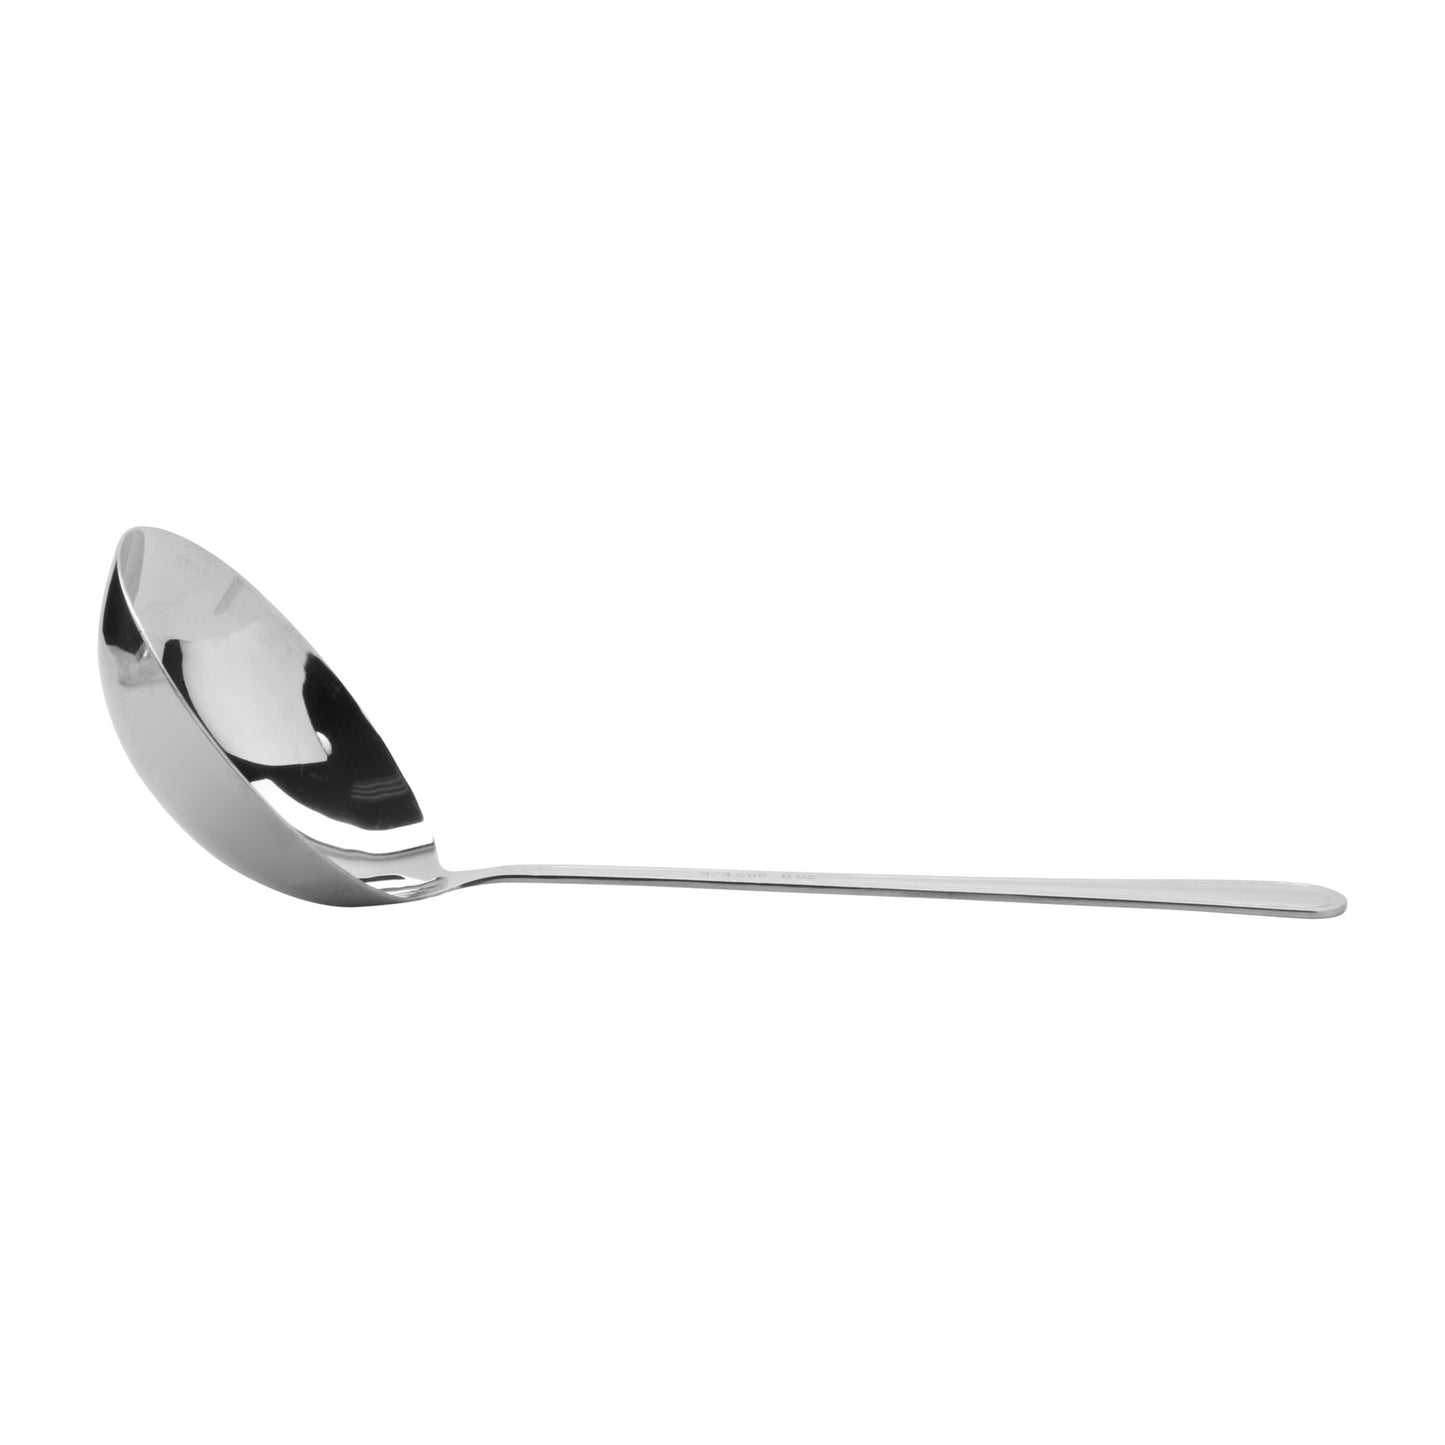 6 oz., 9.5" Stainless Steel Ladle w/ Mirror Finish